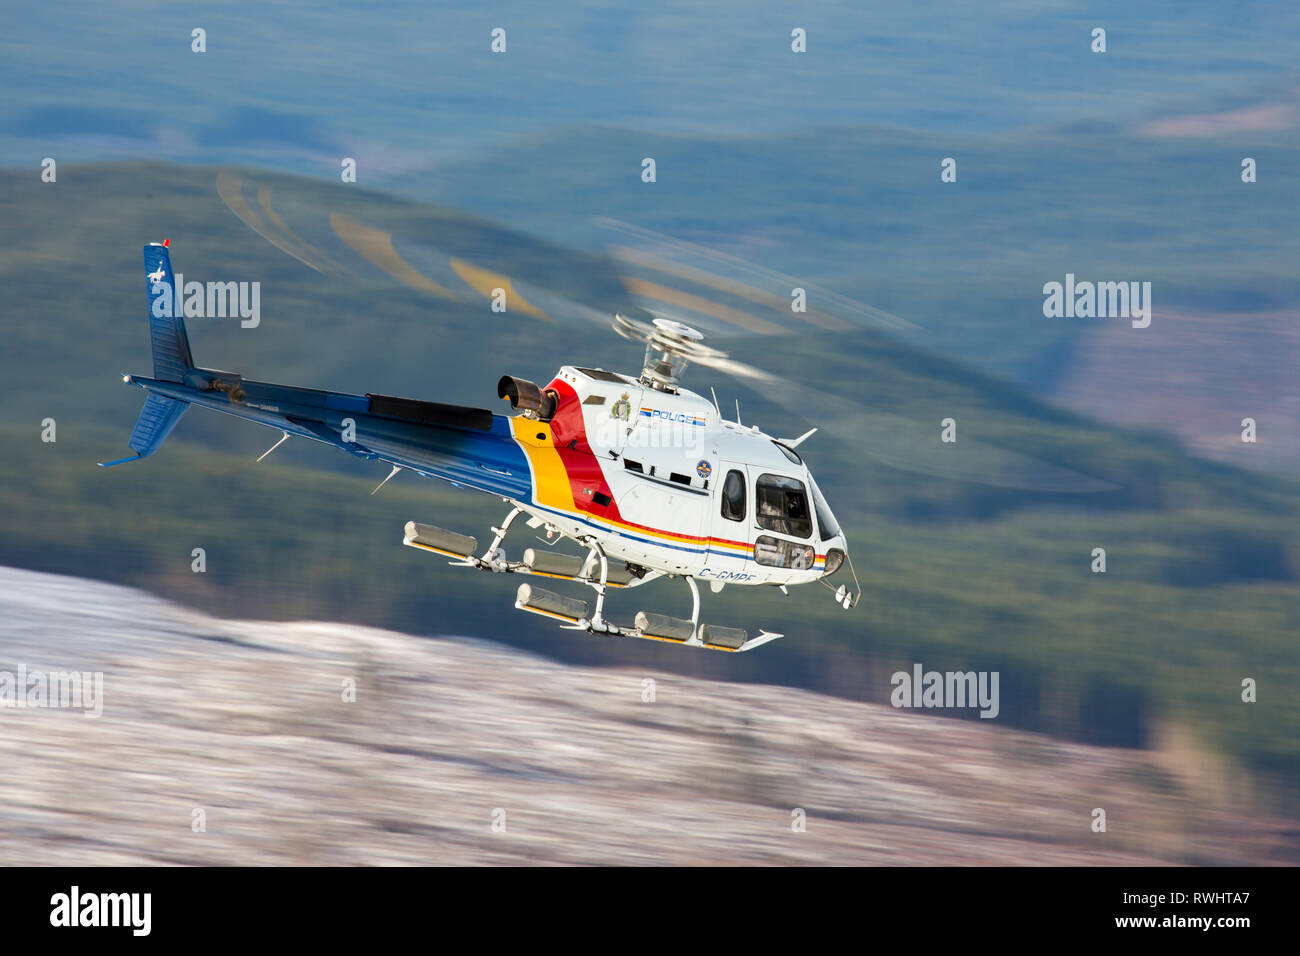 A Royal Canadian Mounted Police helicopter, a Eurocopter AS350, flies near Nanaimo, British Columbia, Canada Stock Photo